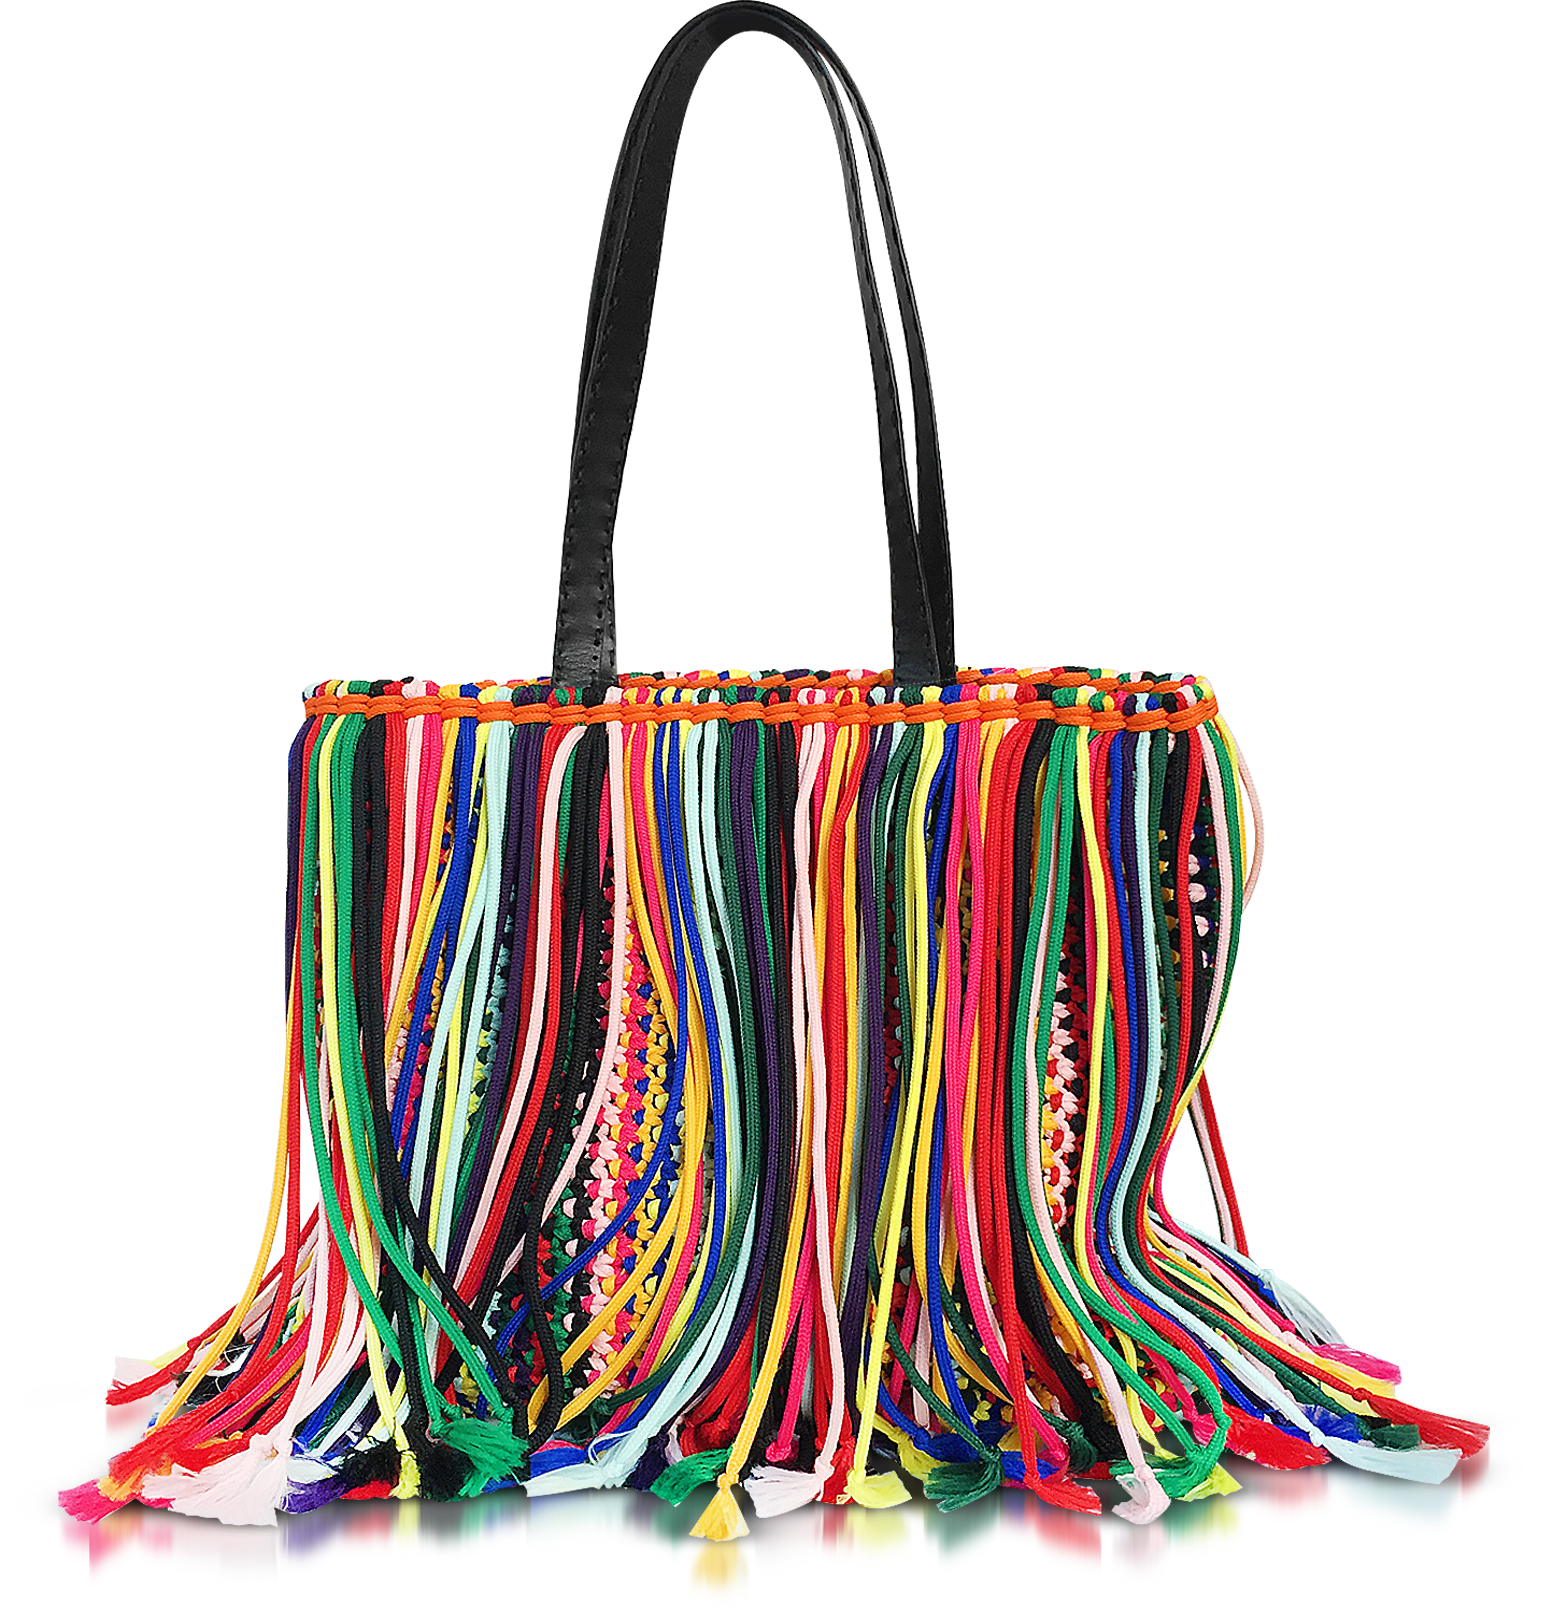 Emilio Pucci Multicolor Fringed Knot Canvas Tote at FORZIERI